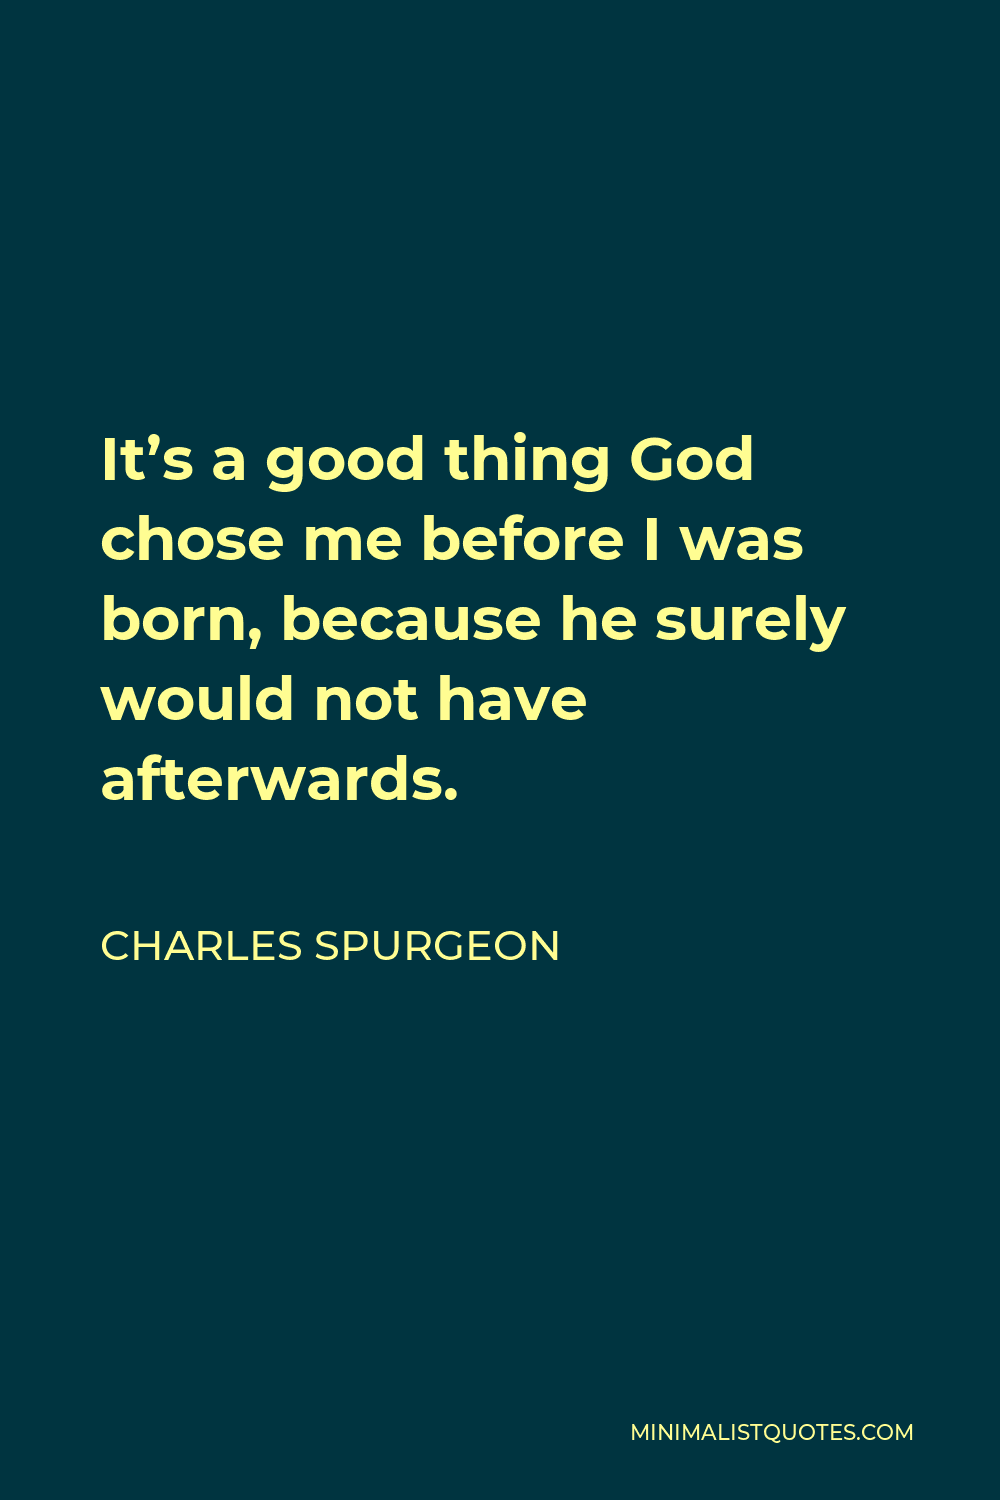 Charles Spurgeon Quote - It’s a good thing God chose me before I was born, because he surely would not have afterwards.